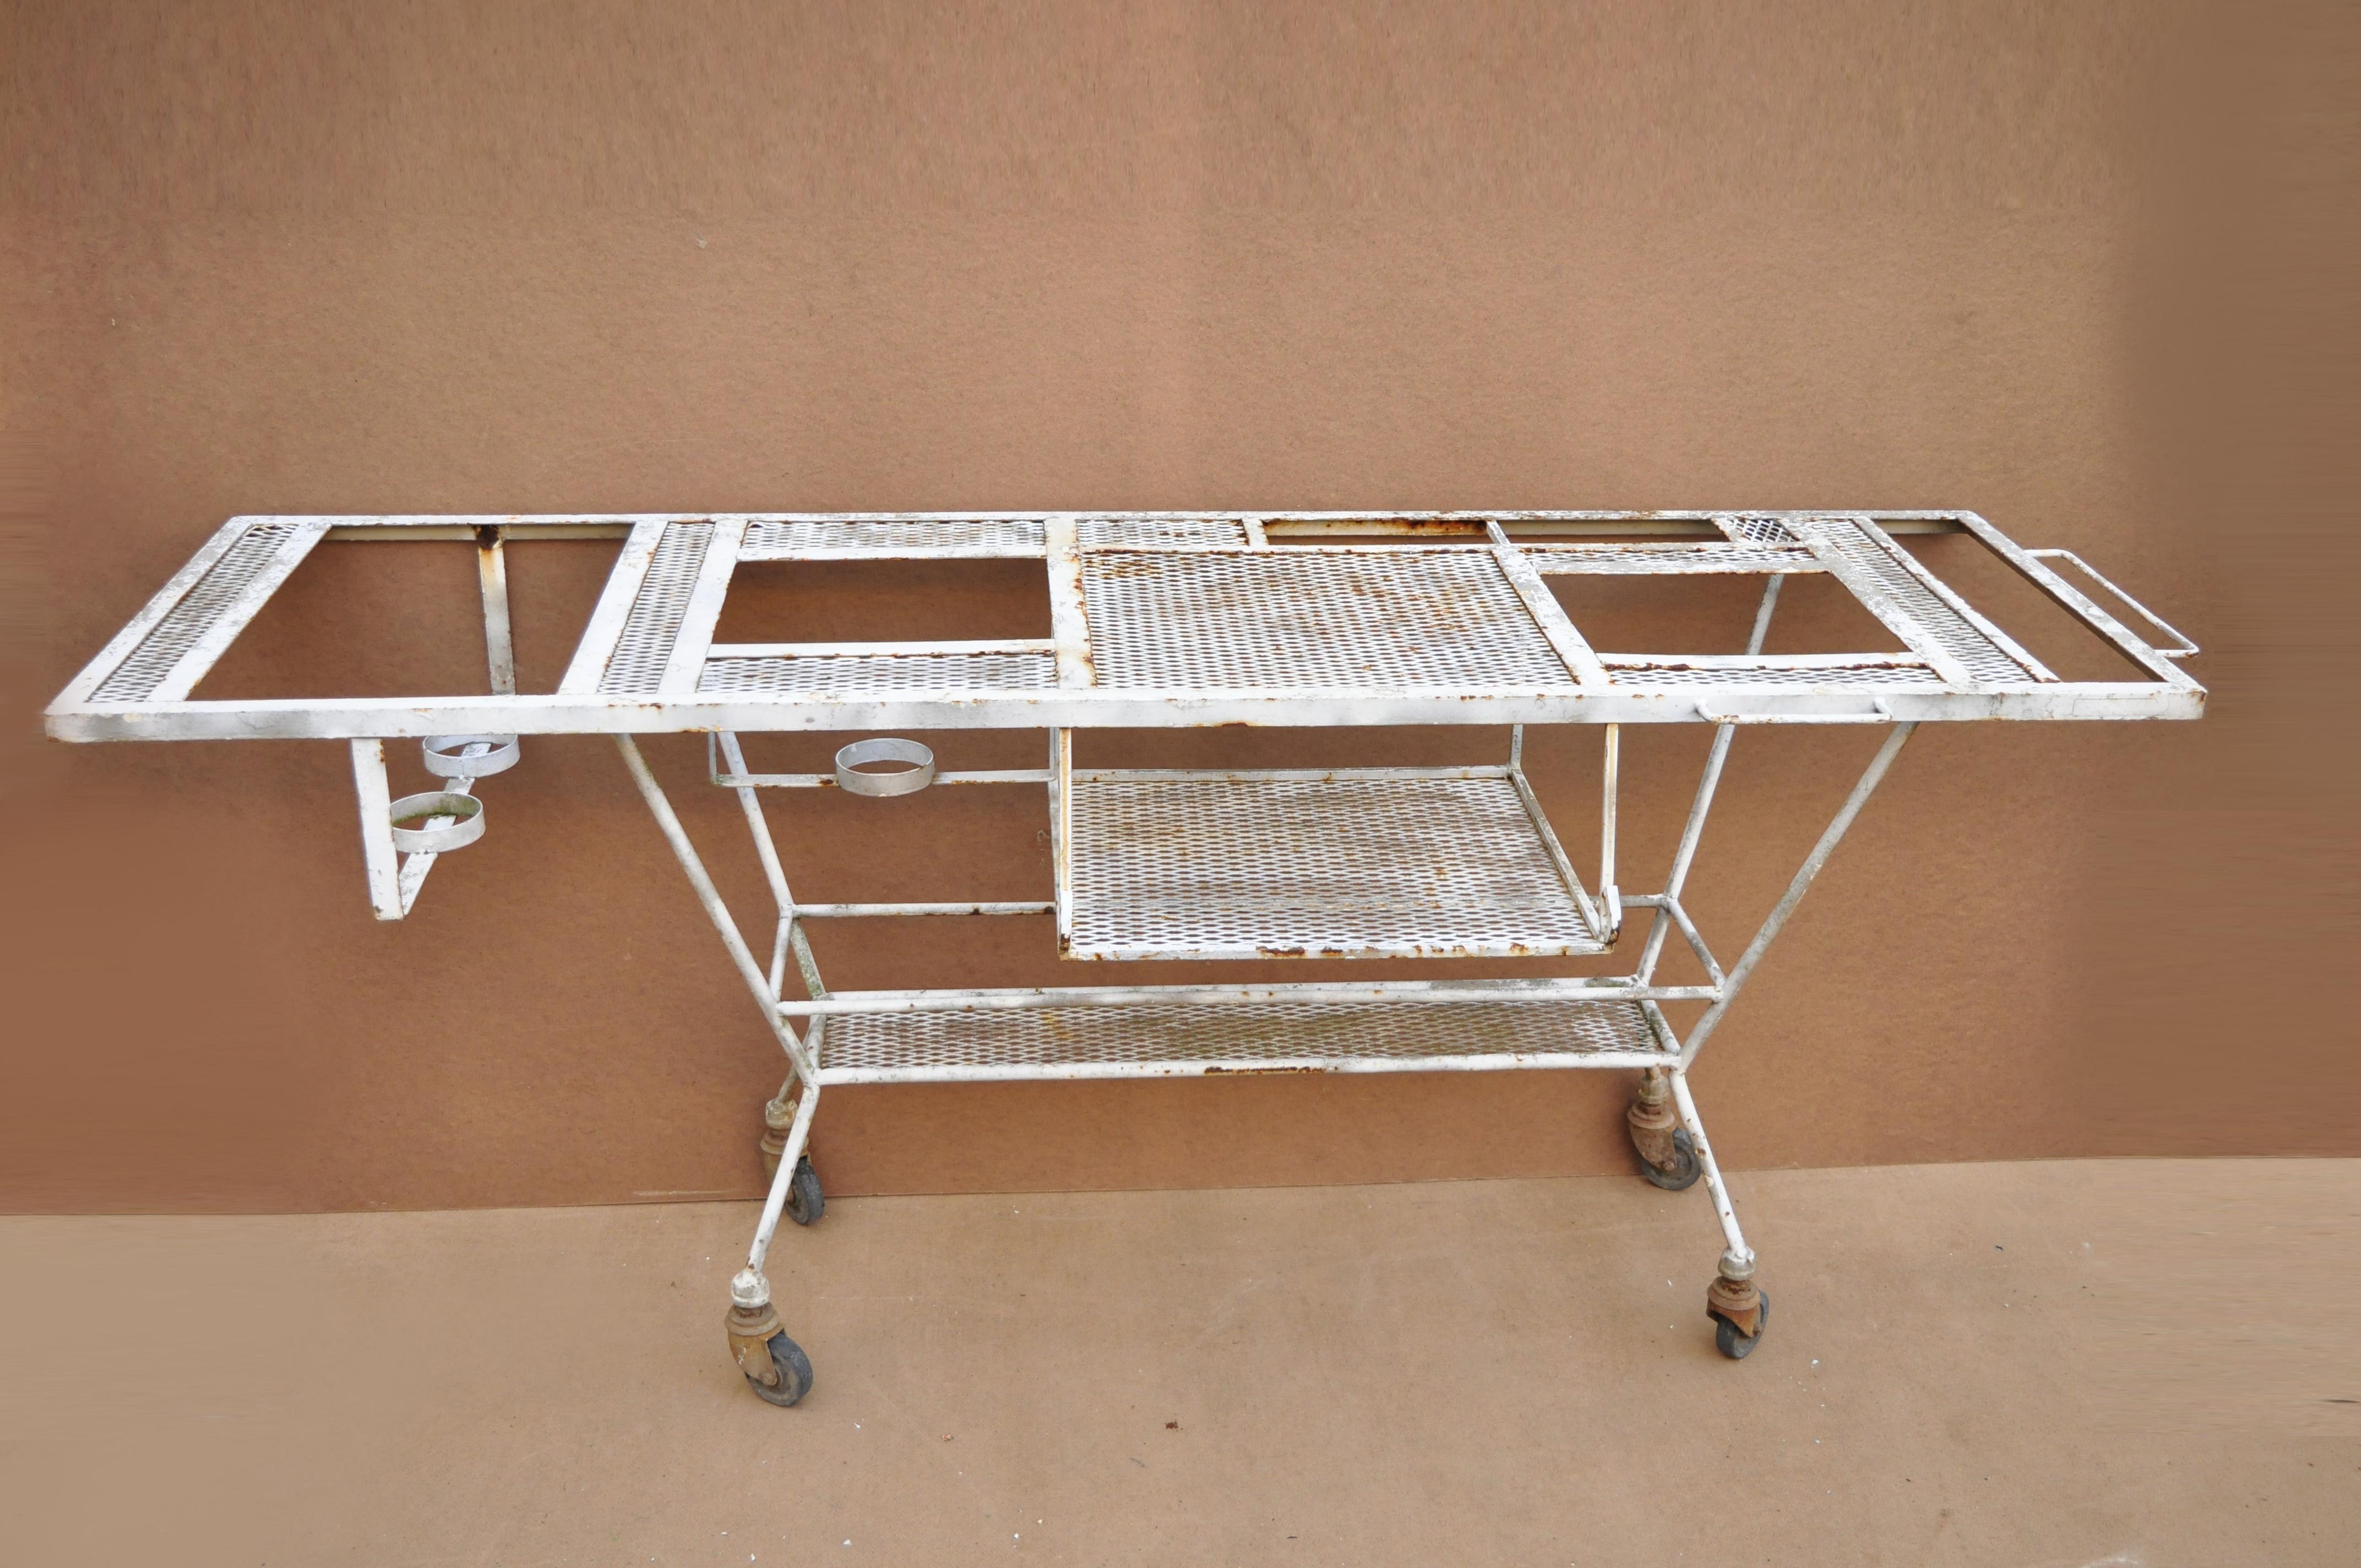 Vintage wrought iron industrial steampunk rolling bar cart barbeque pit table. Item features various compartments, rolling wheels, mesh surfaces, side handle, wrought iron construction, great style and form, original use is unknown but great to